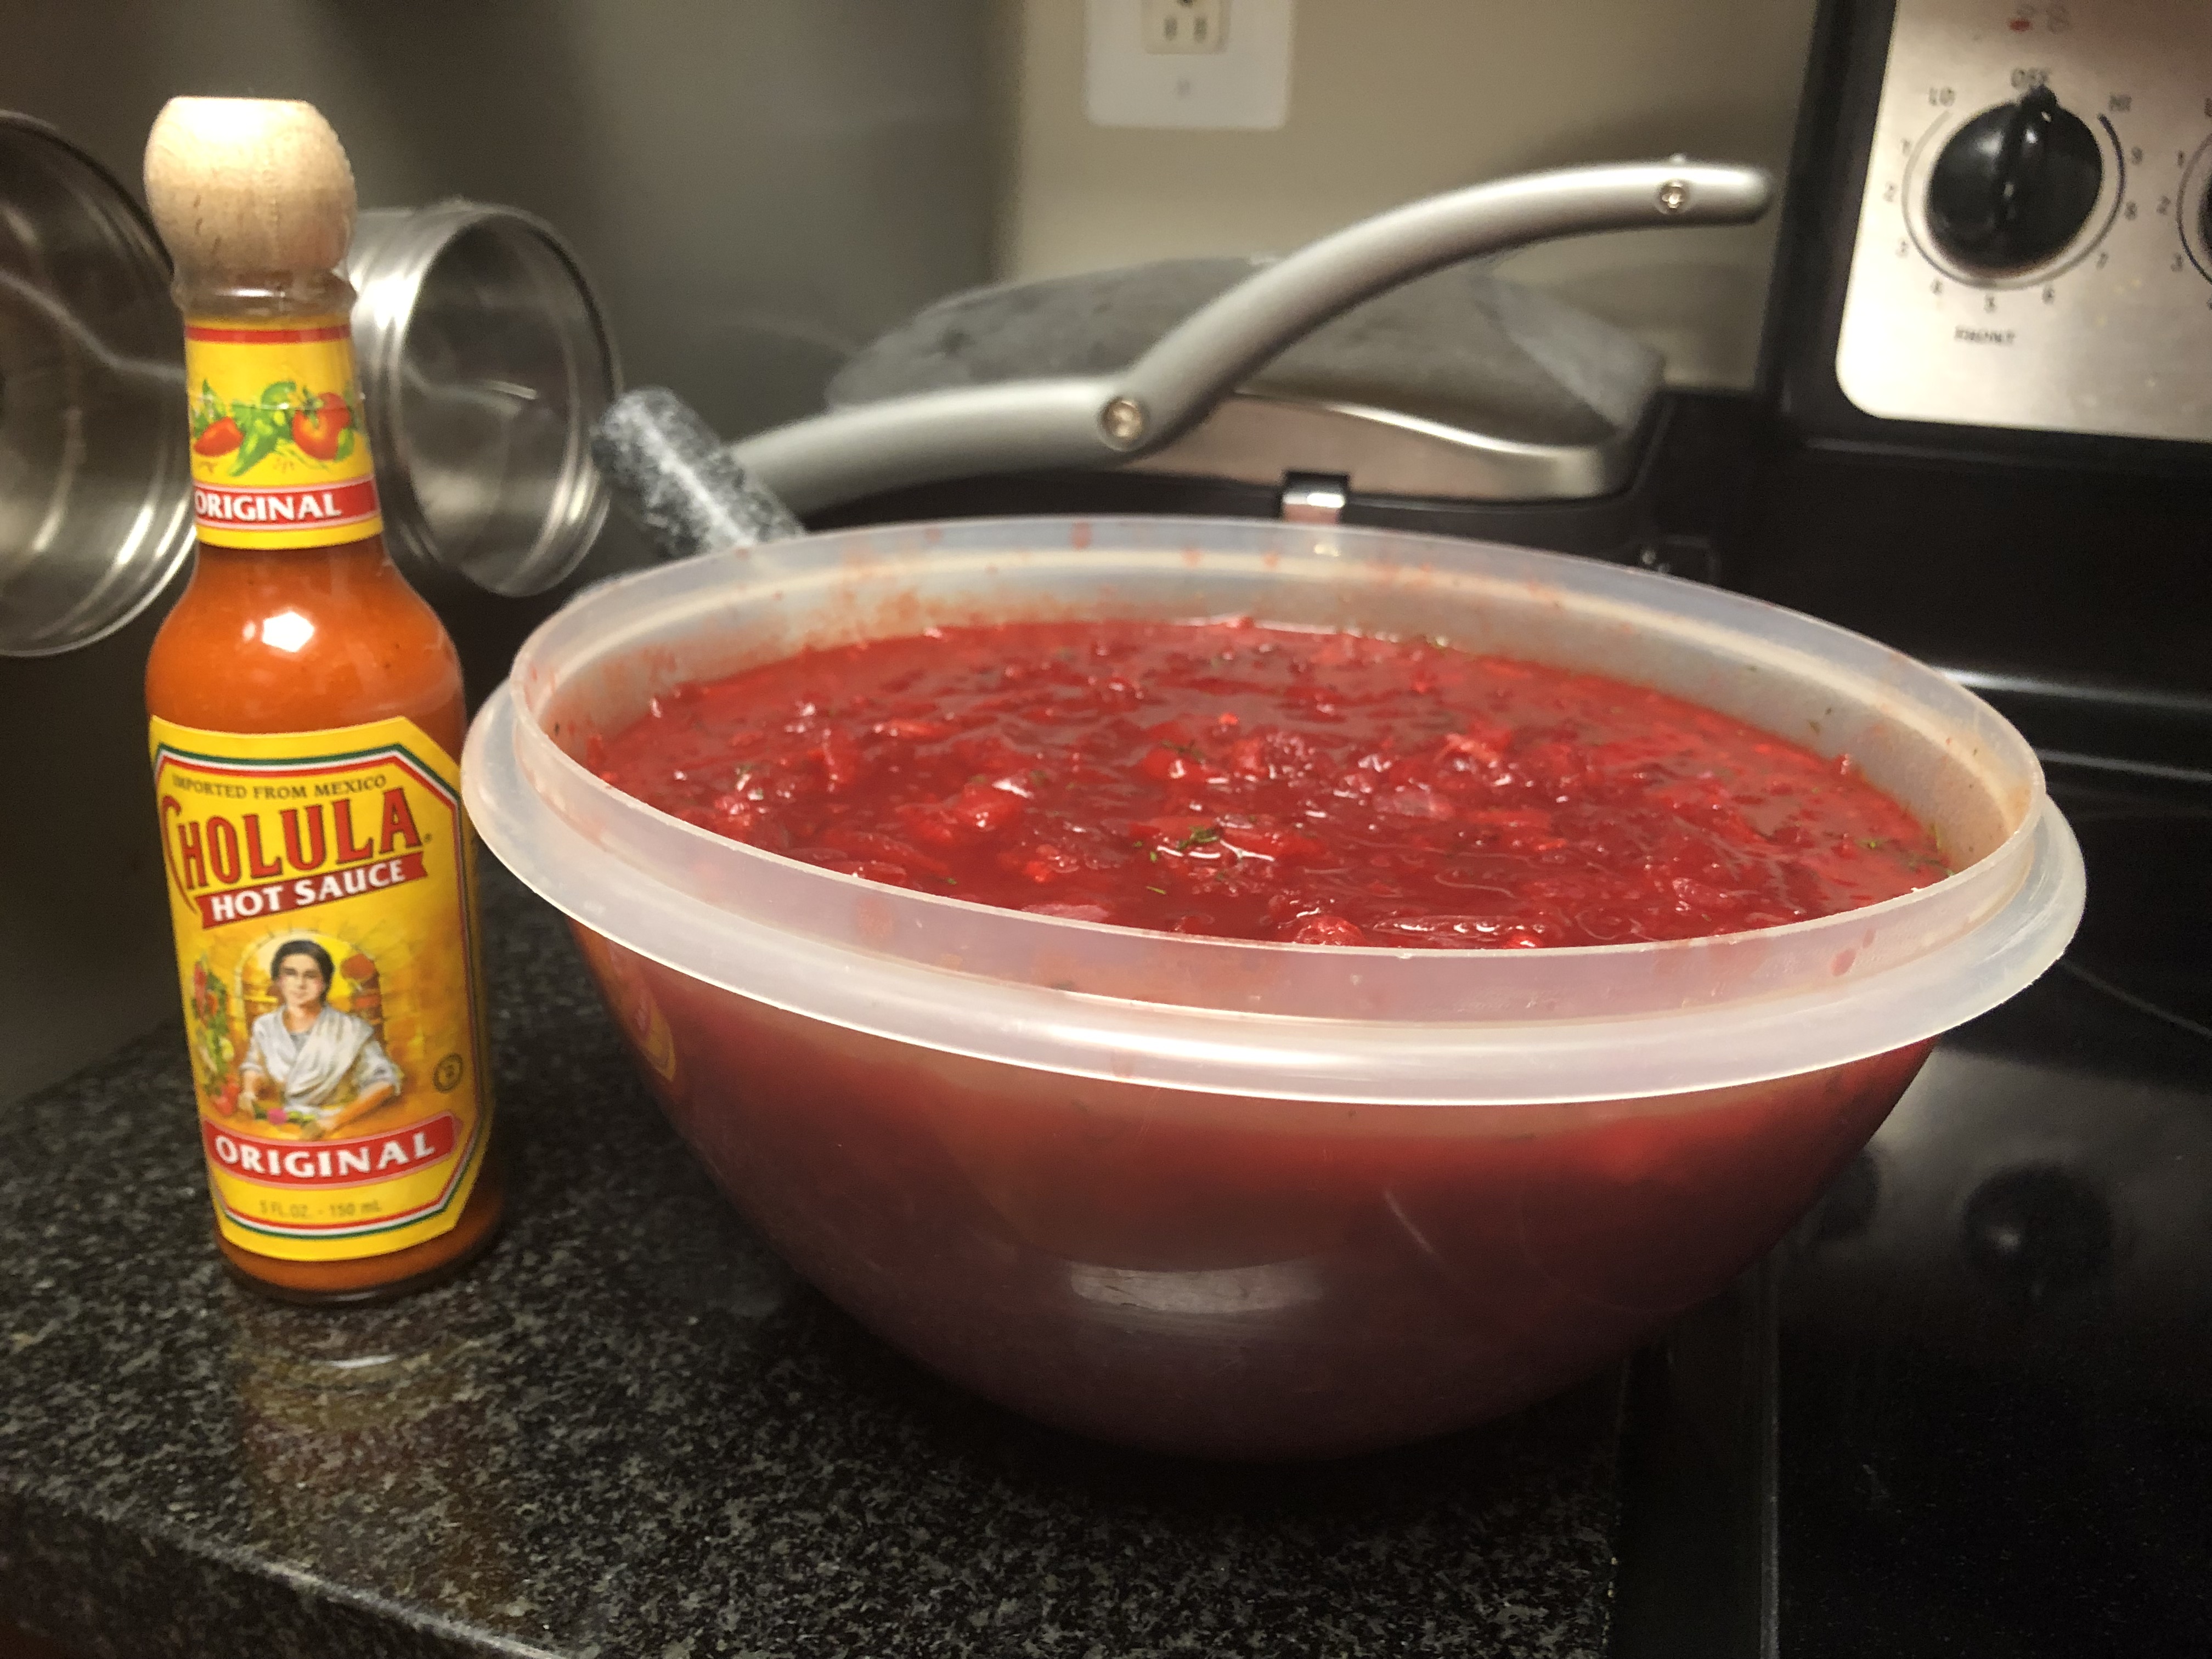 Leftovers filling extra large tupperware container, Cholula bottle for scale